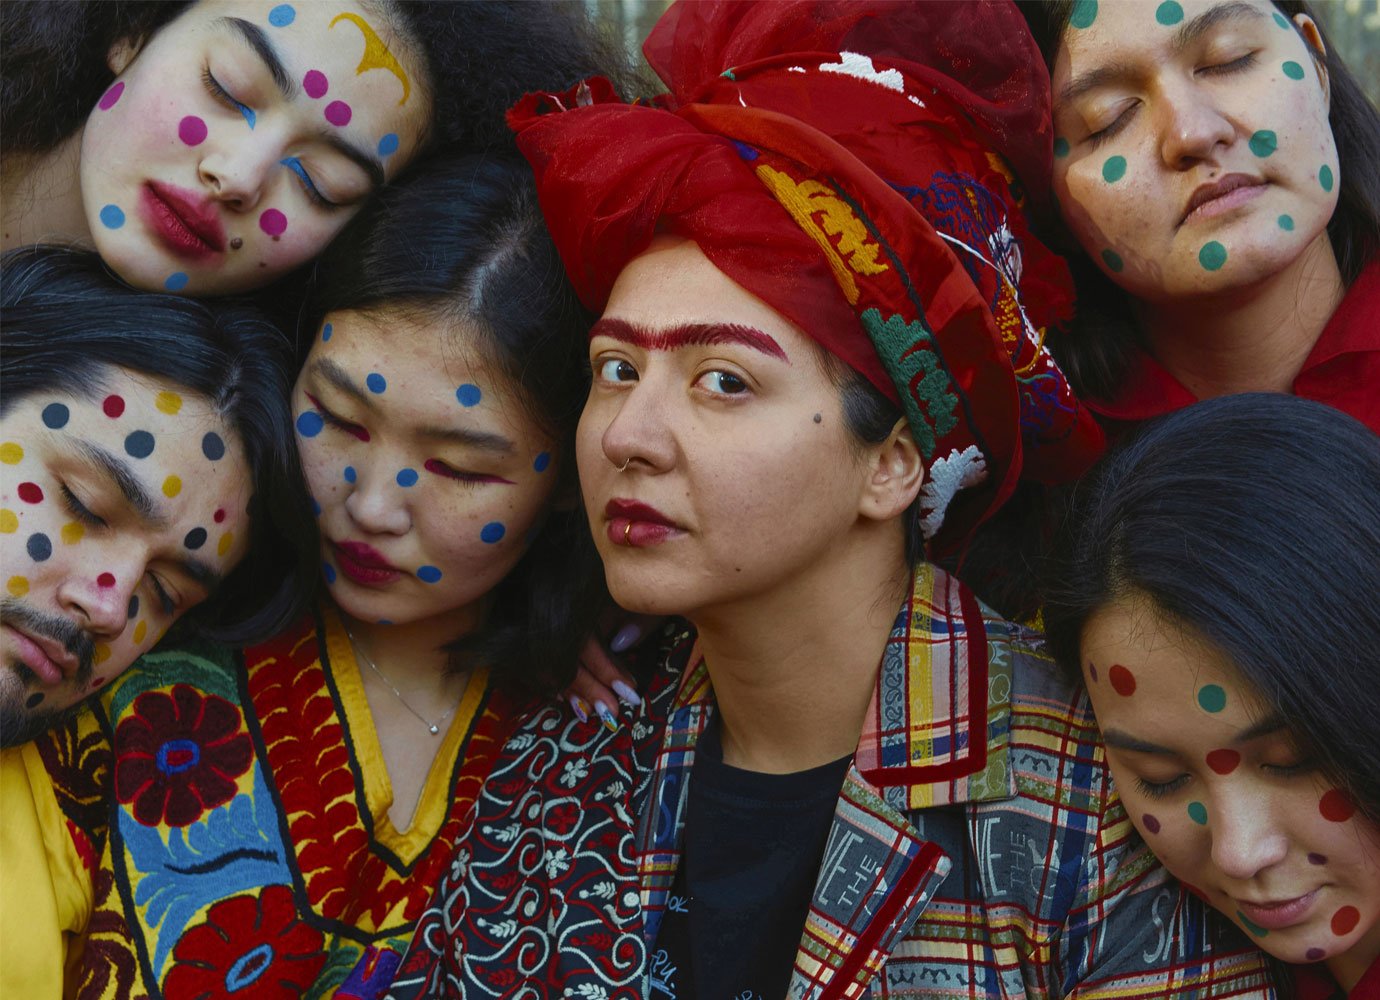 In conservative Tajikistan, Gen Z activists are using Instagram to fight for feminism